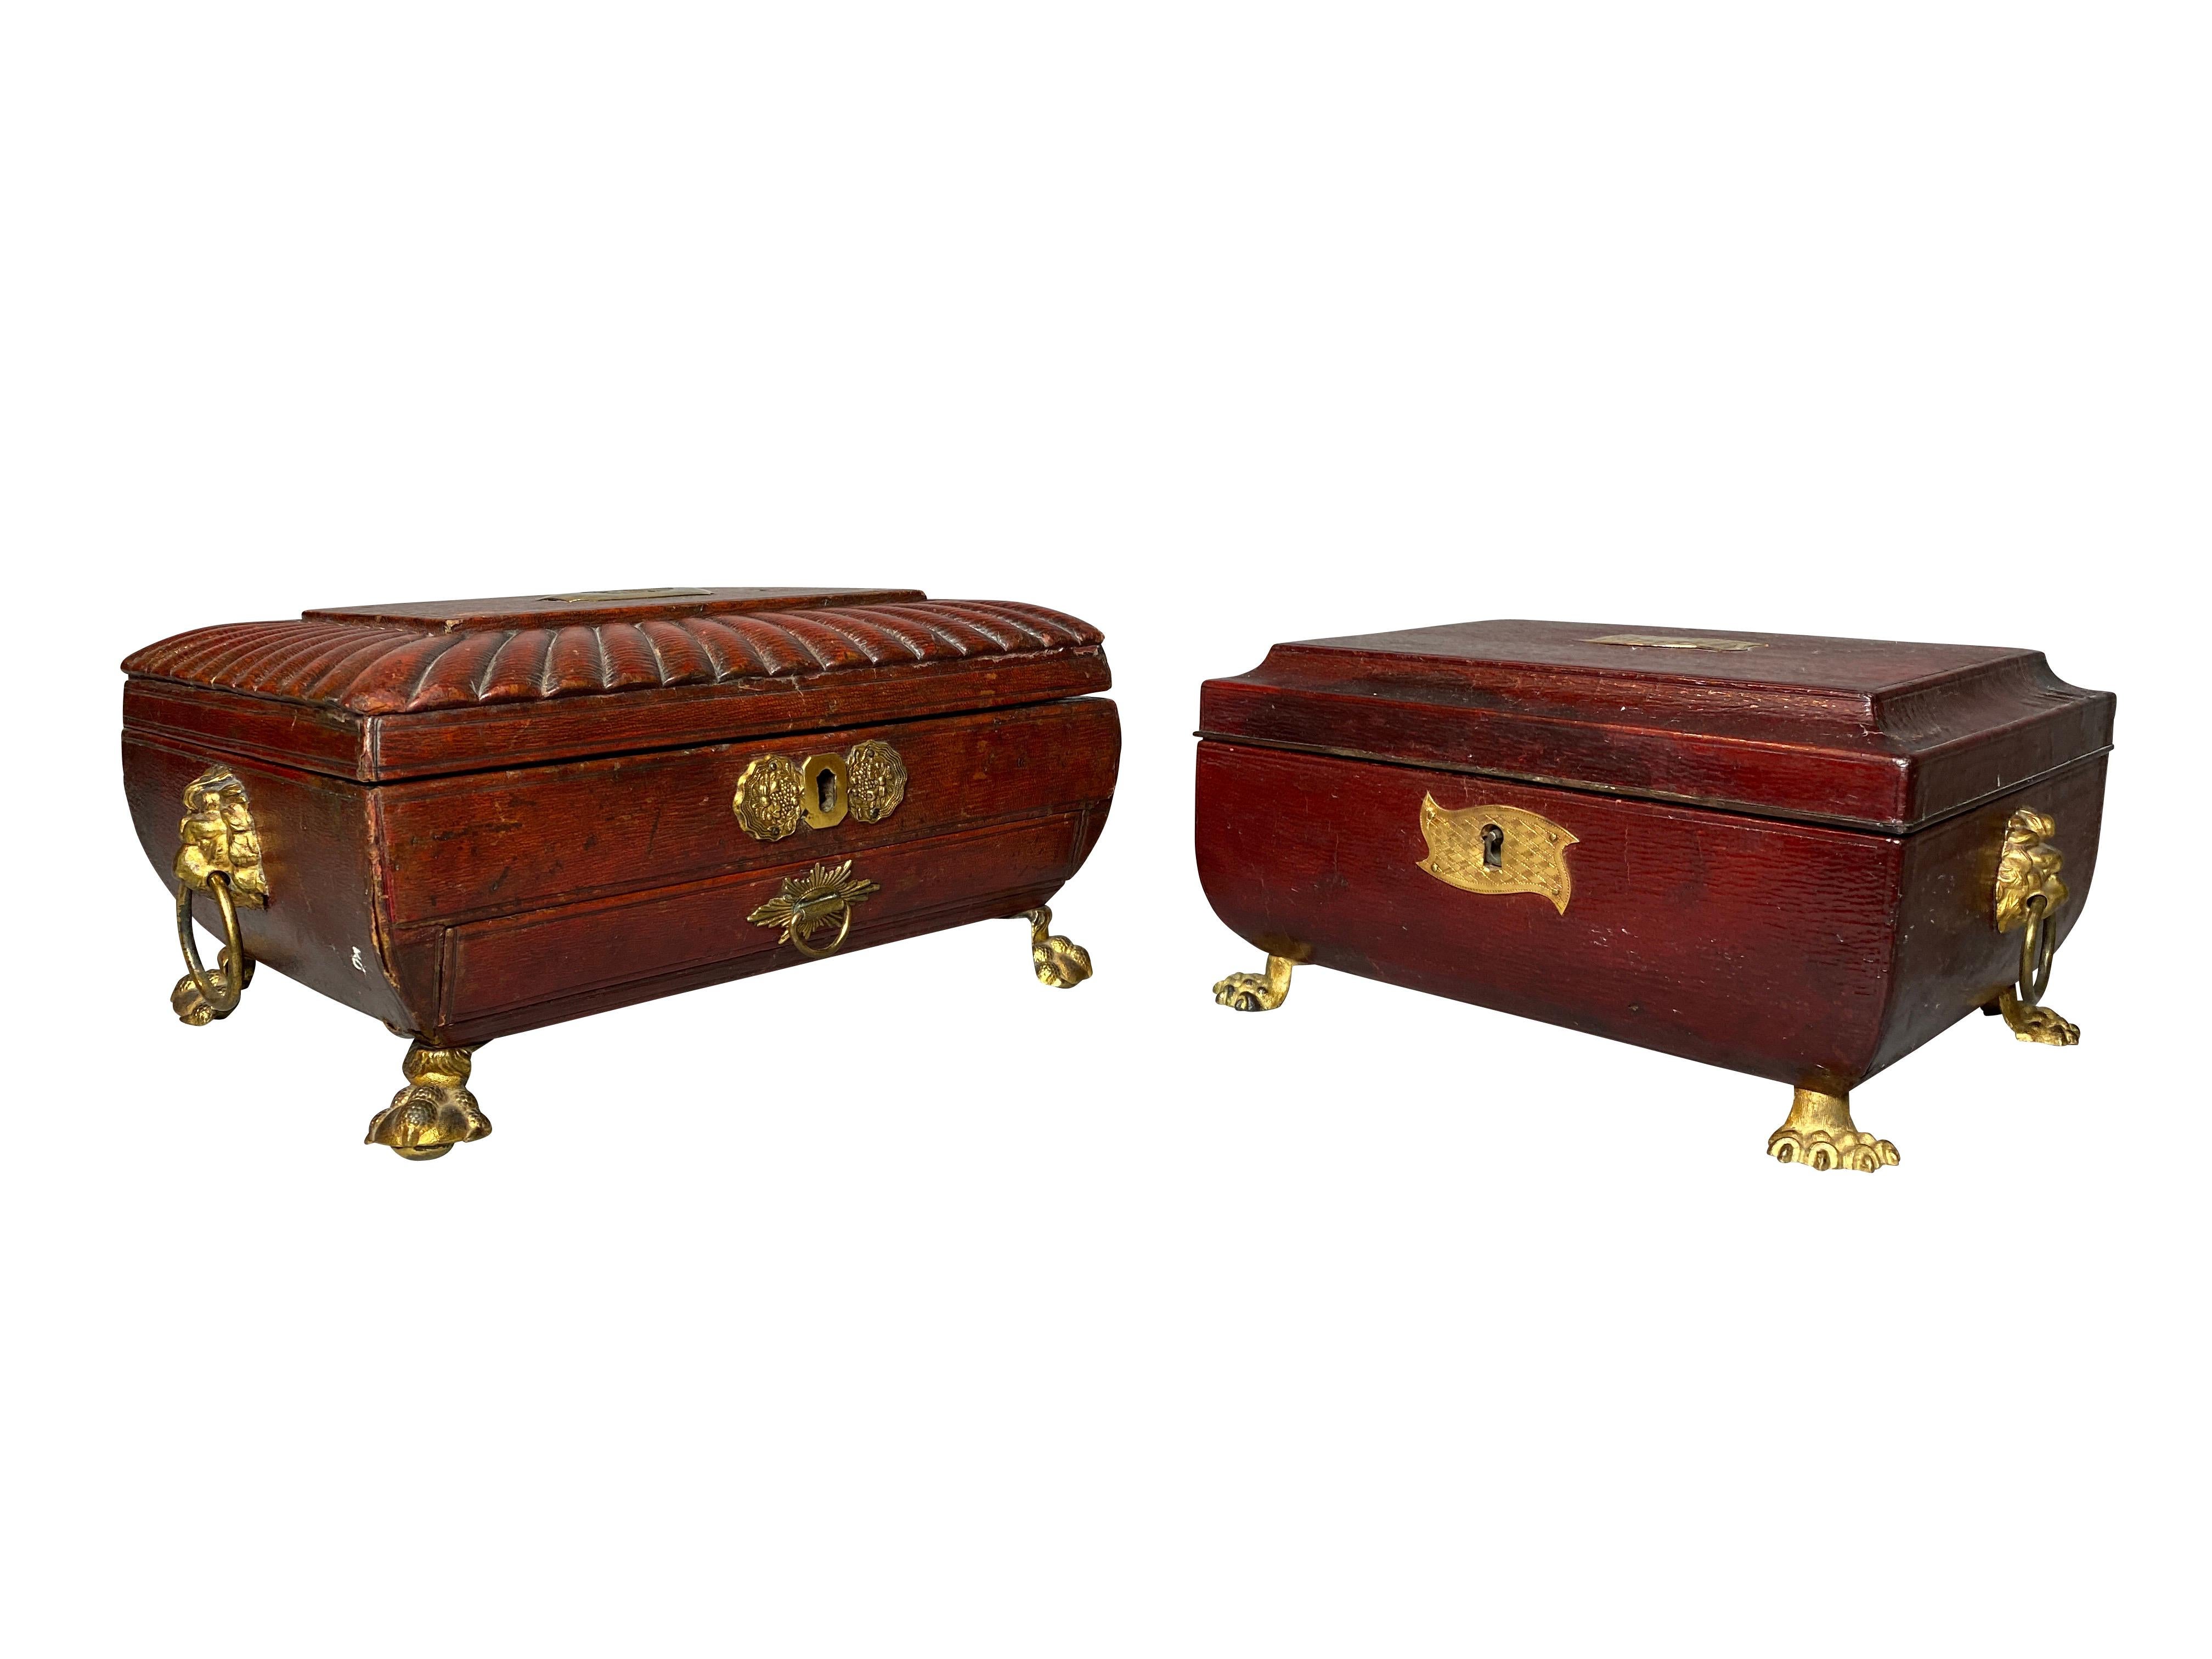 Each with a fitted interior, gilt bronze mounts.